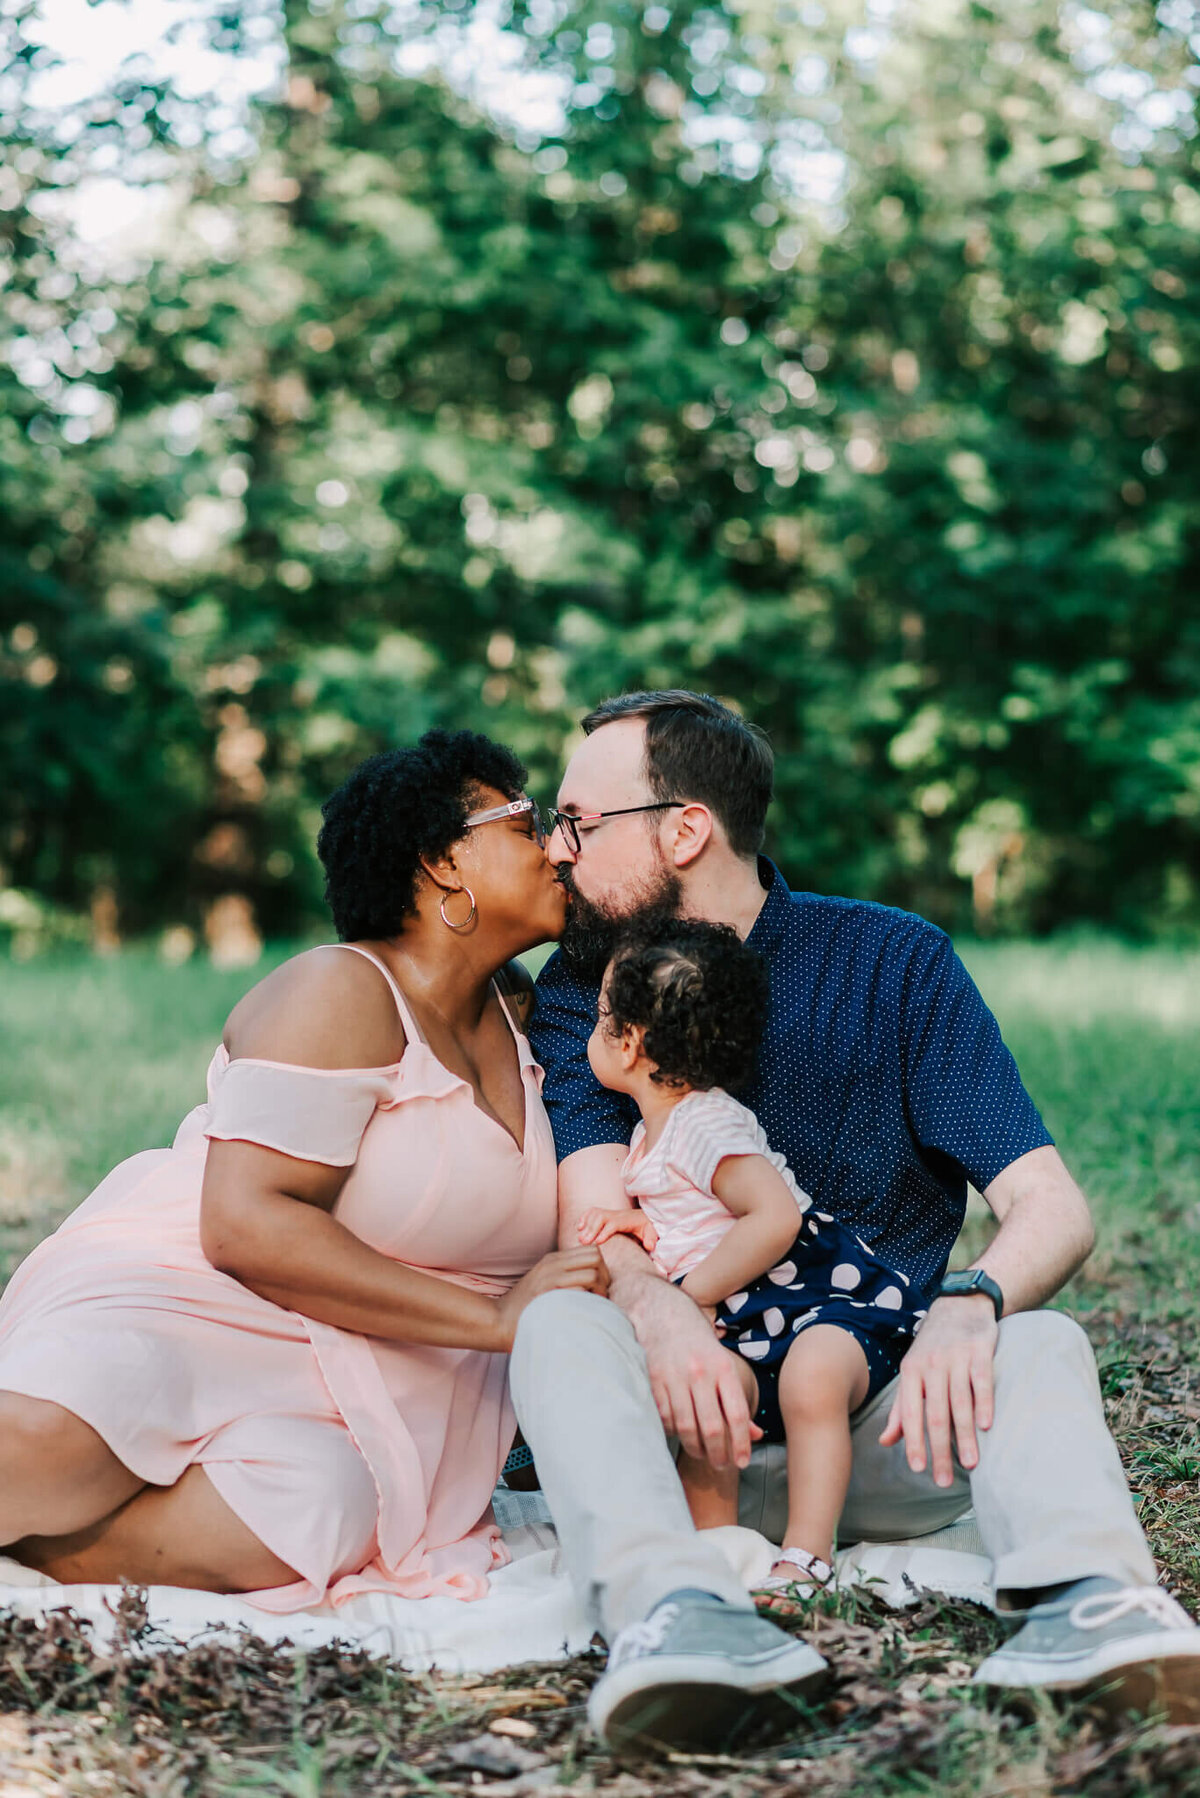 Parents sharing a kiss with their daughter in his lap captured by northern virginia family photographer, Denise Van.